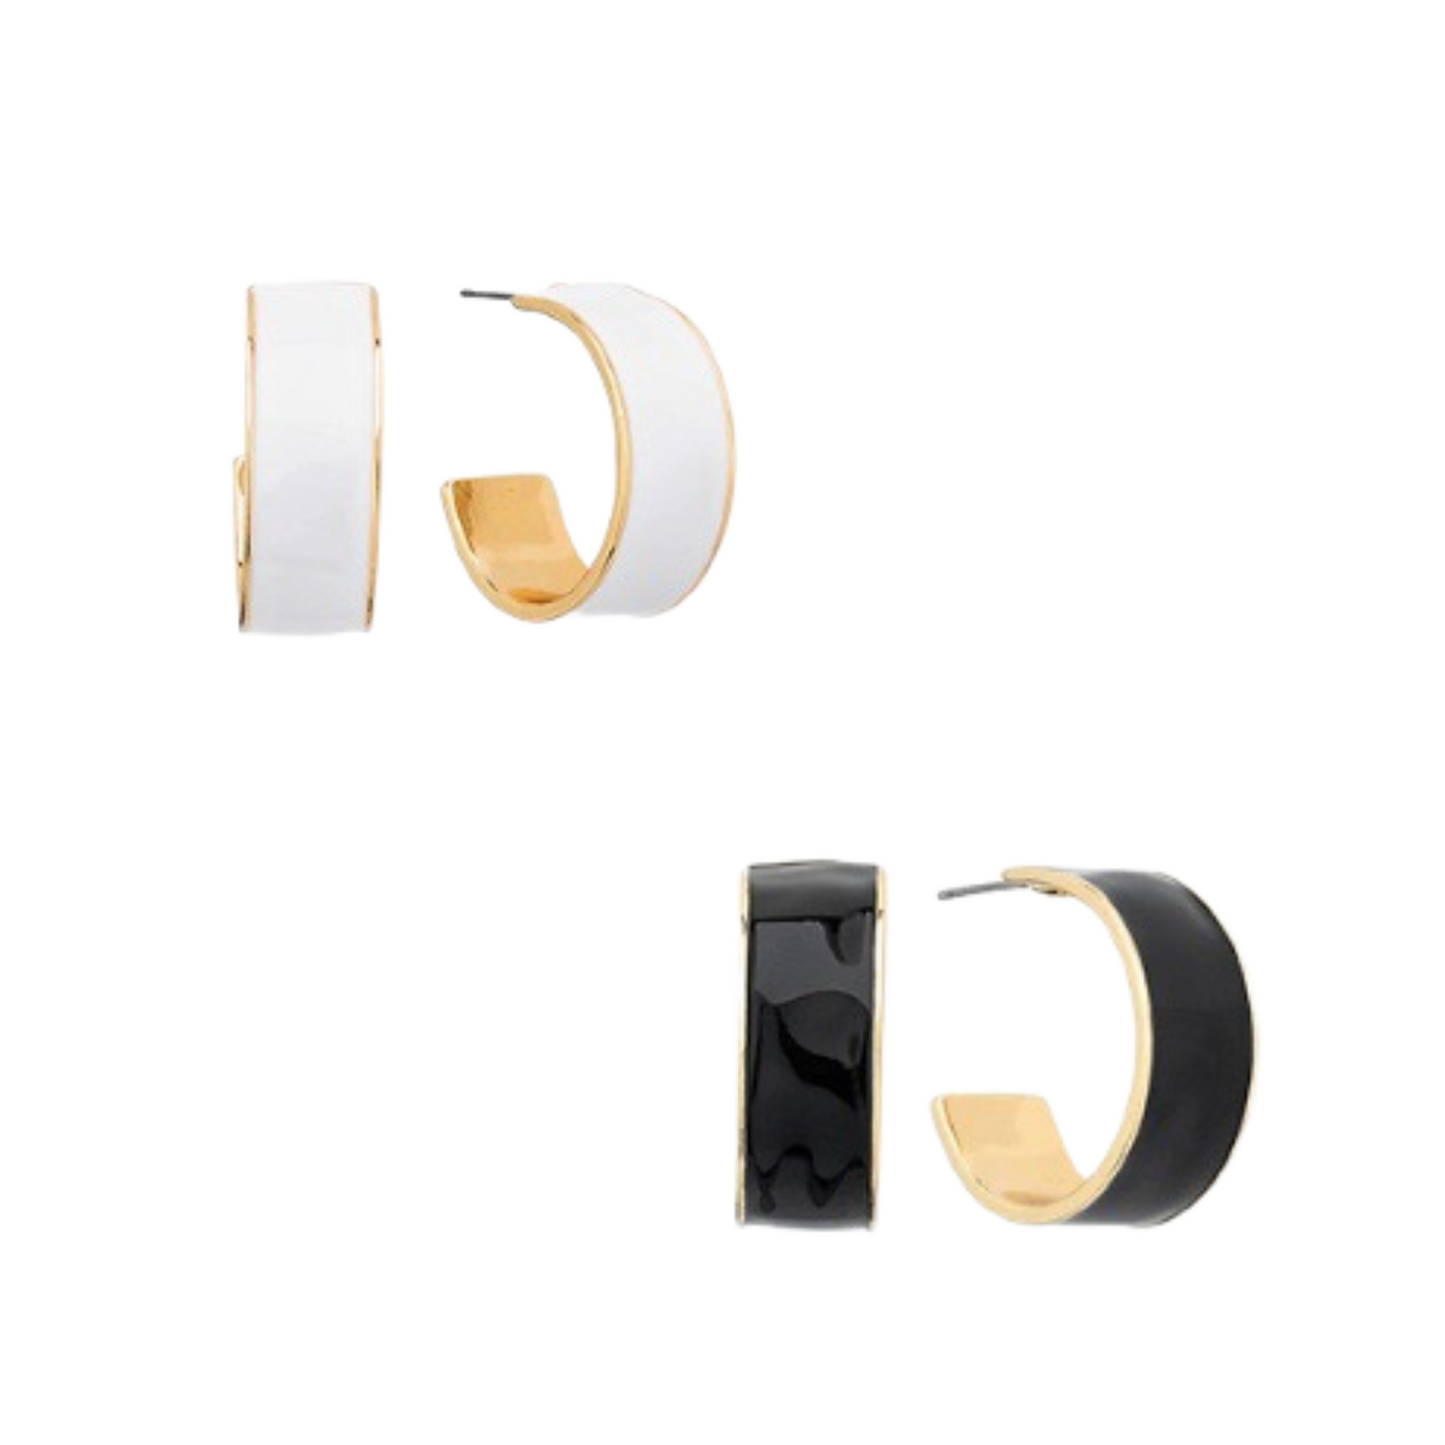 Enhance your style with our 22 mm Colored Metal Hoops. Available in white or black with gold trim, these small hoops add a touch of elegance to any outfit. Made with quality materials, they are sure to bring compliments and elevate your look.